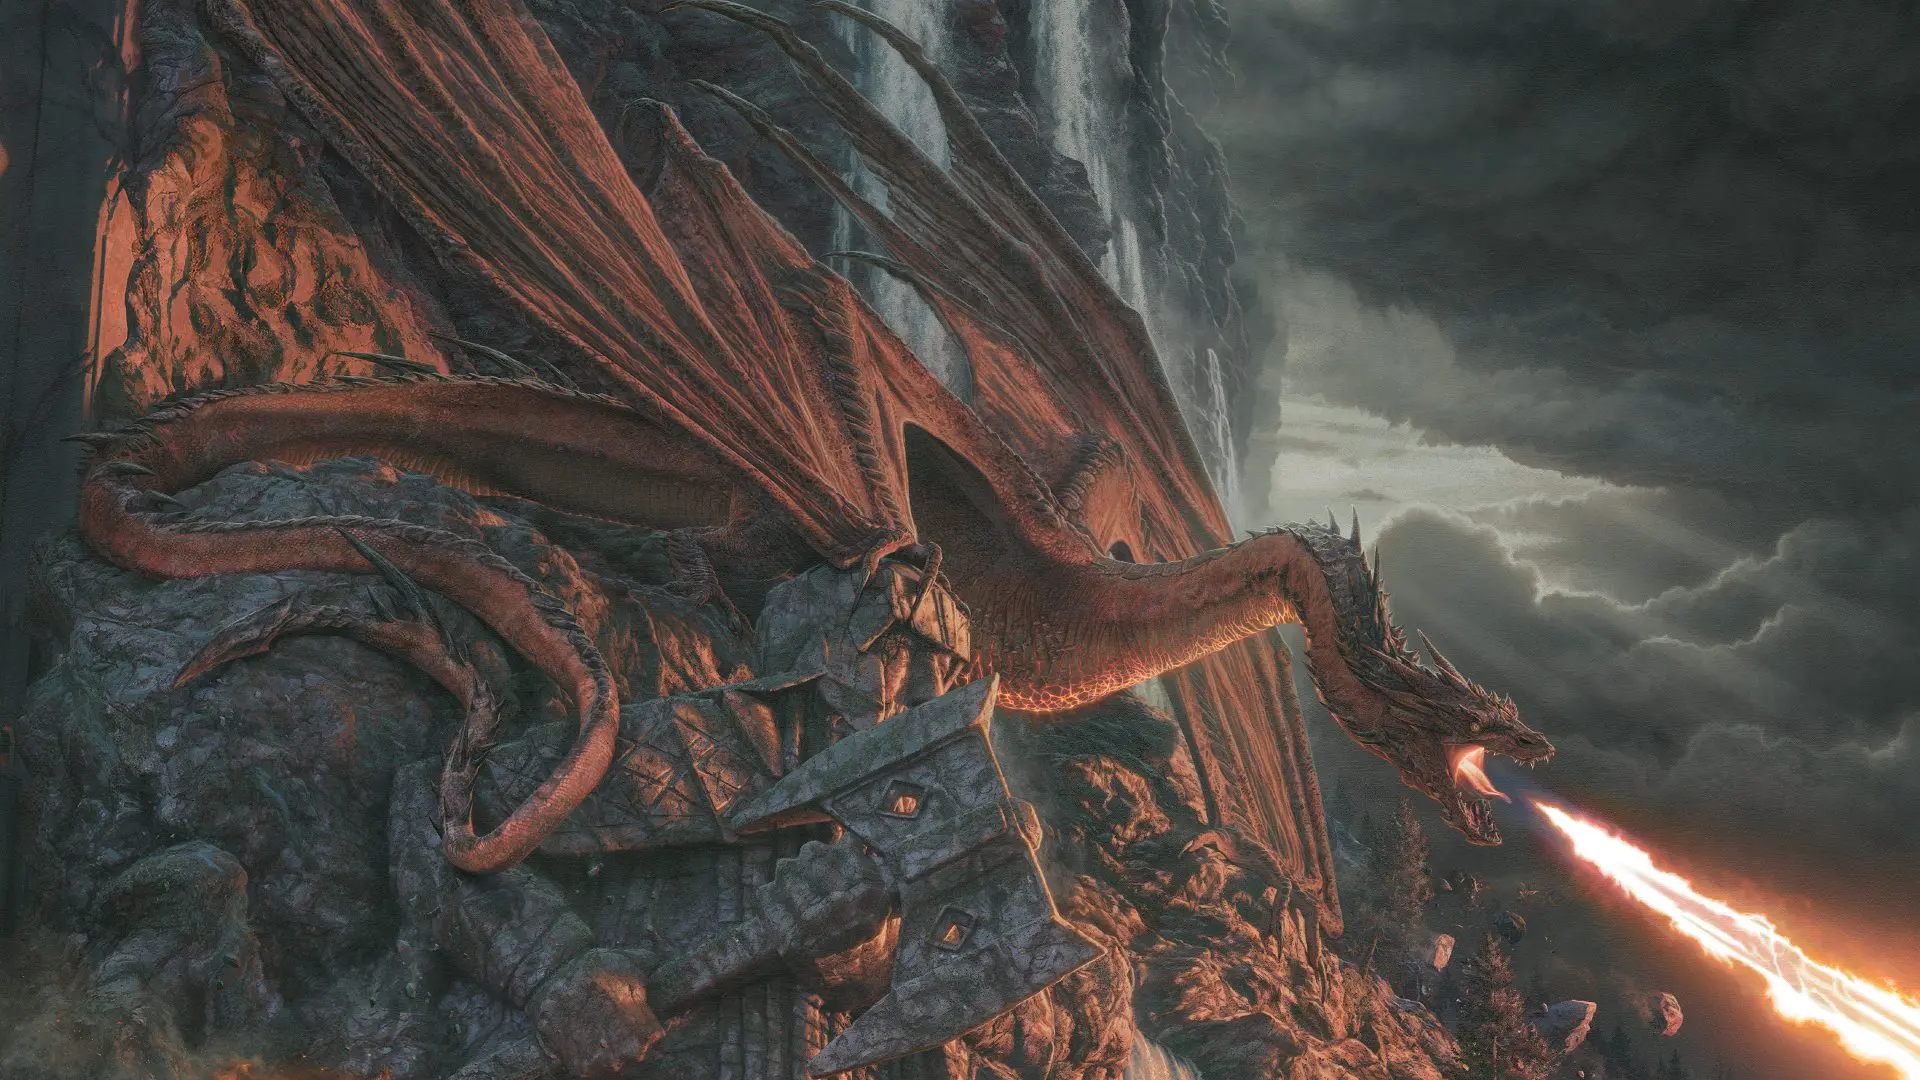 A dragon is flying over the rocks in front of some mountains.